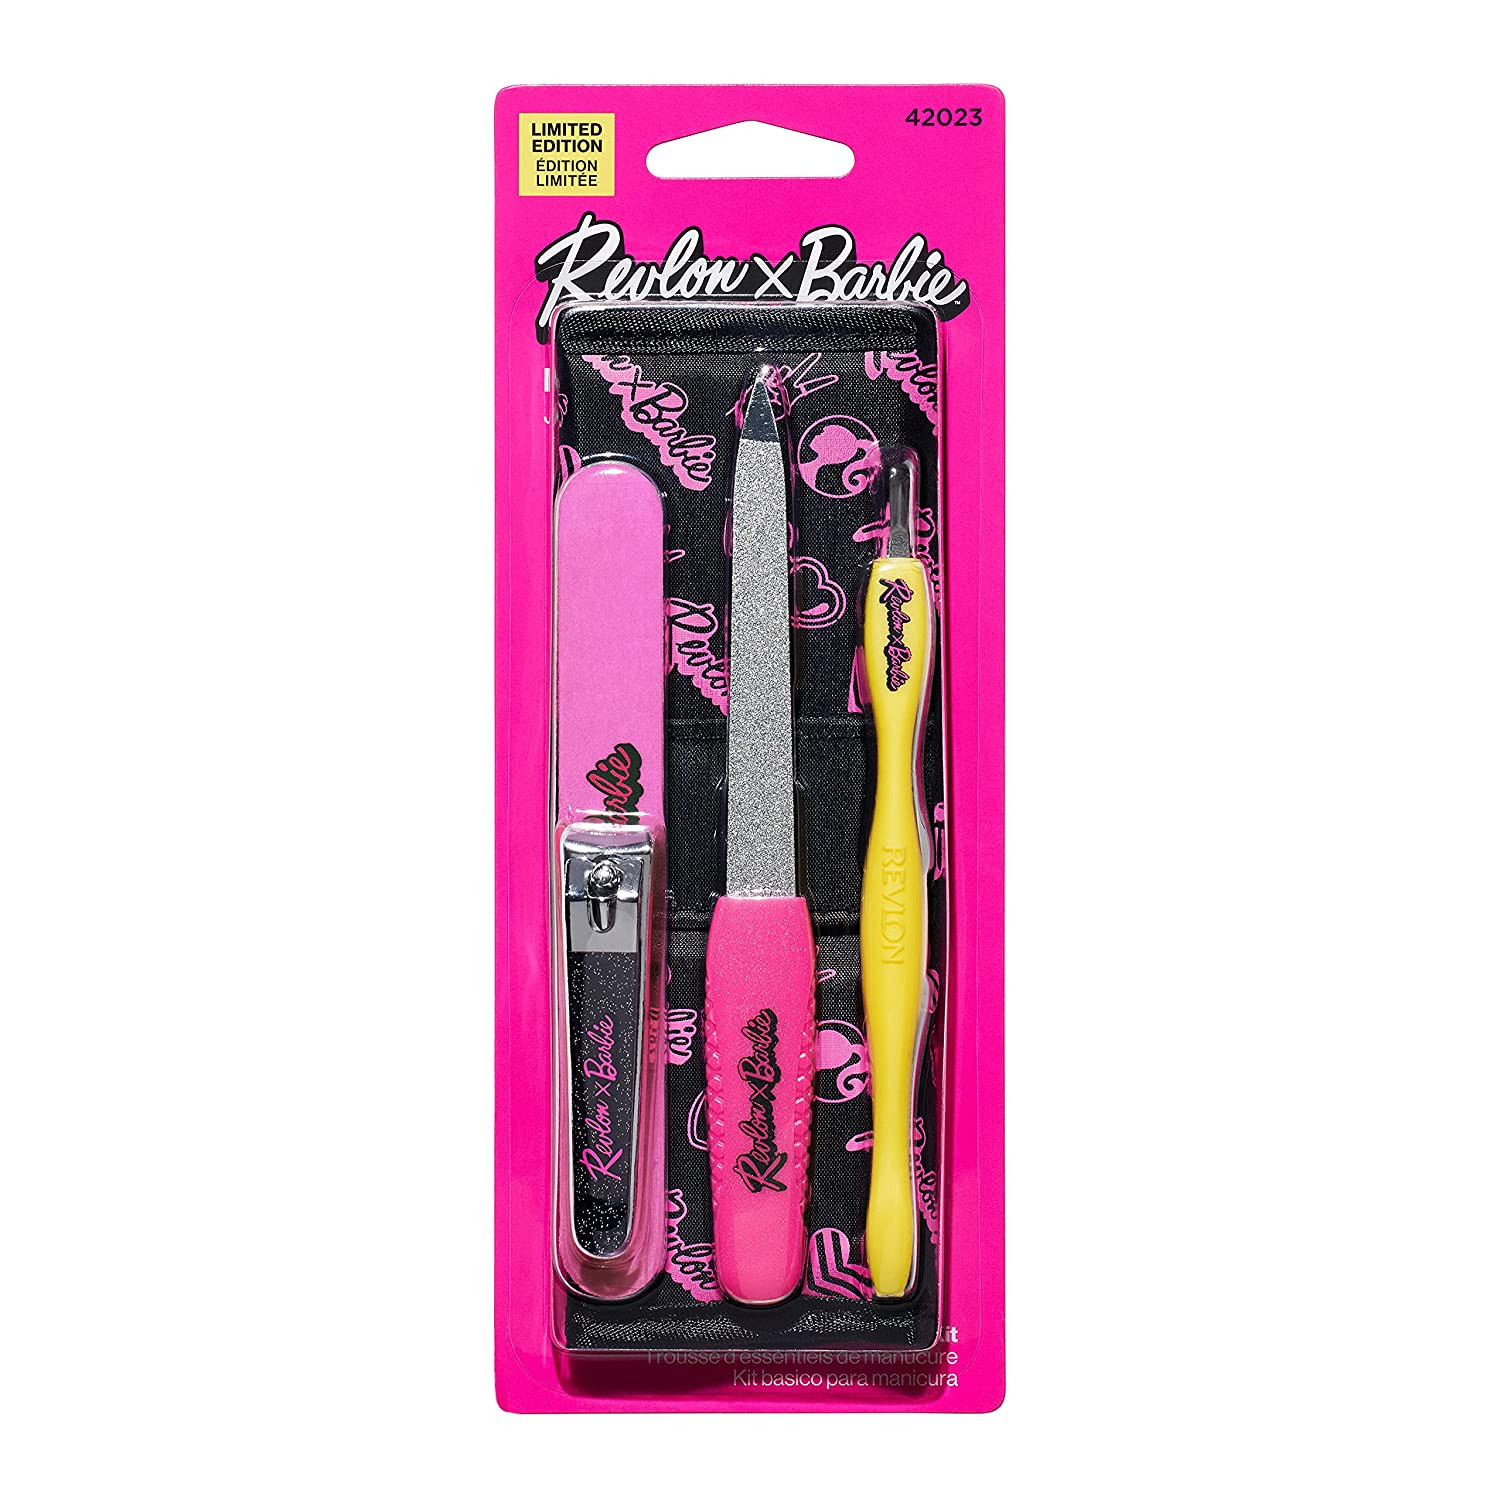 Revlon x Barbie Manicure Essentials Kit, 4 Piece Stainless Steel Beauty Set  Includes Nail Buffer, Emeryl File, Cuticle Pusher, Nail Clipper & Travel  Case - Big2 Bazaar